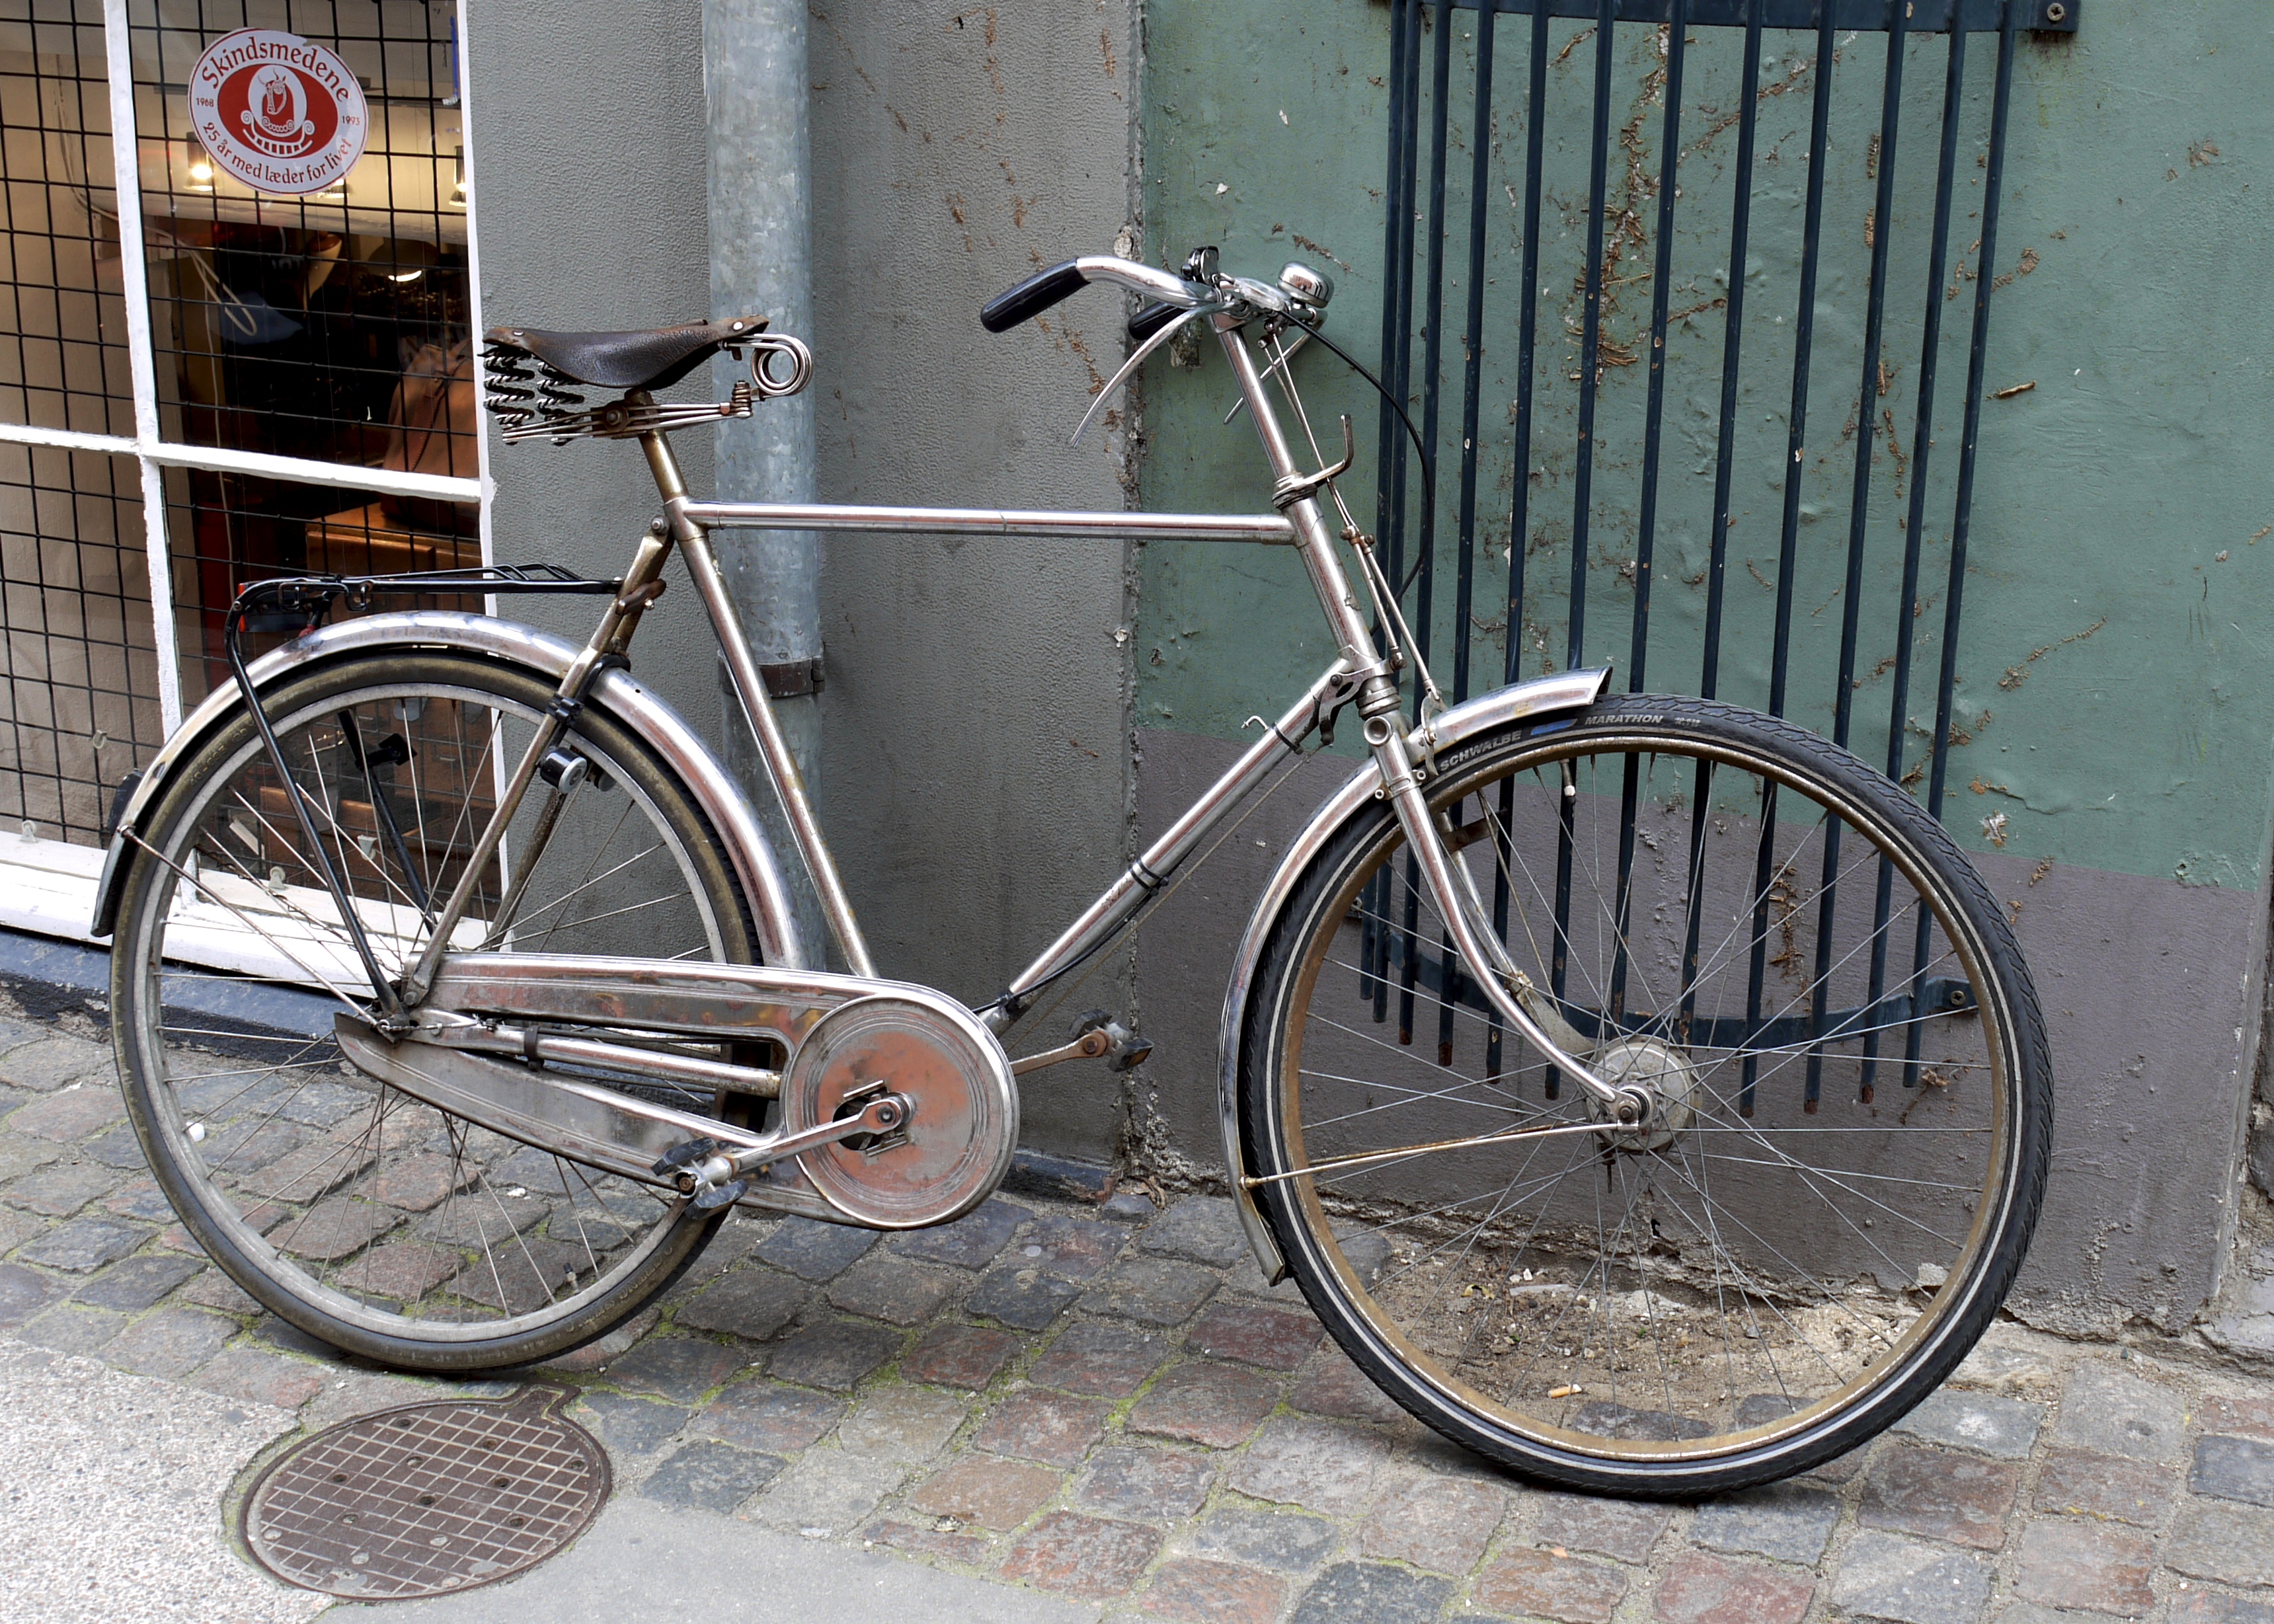 File:Silver bicycle.jpg - Wikimedia Commons